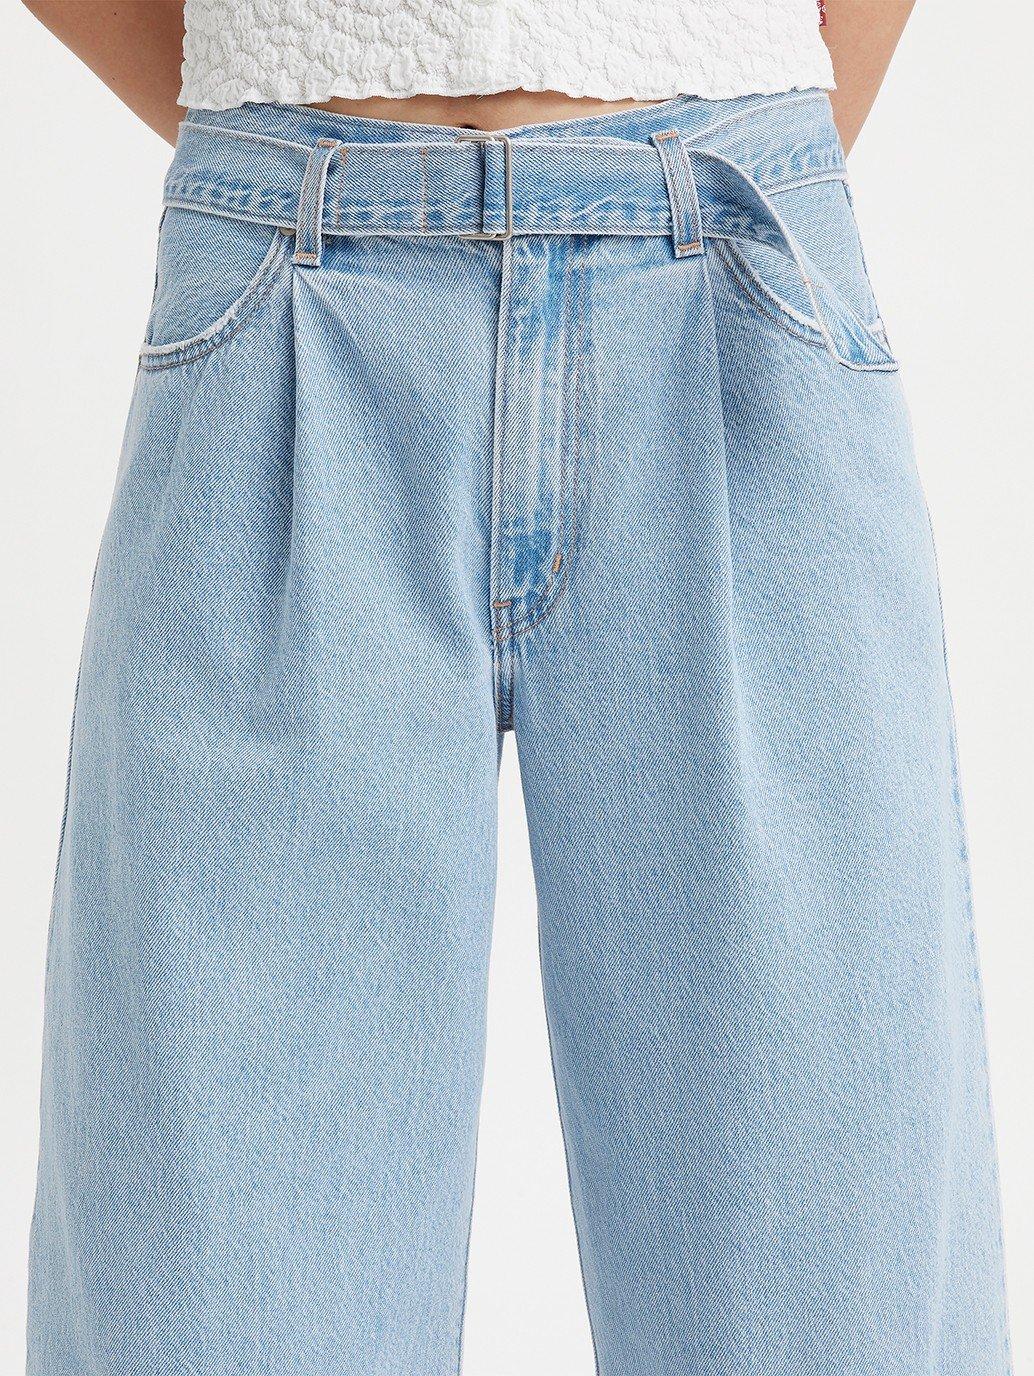 Buy Levi's® Women's Belted Baggy Jean | Levi’s® Official Online Store PH